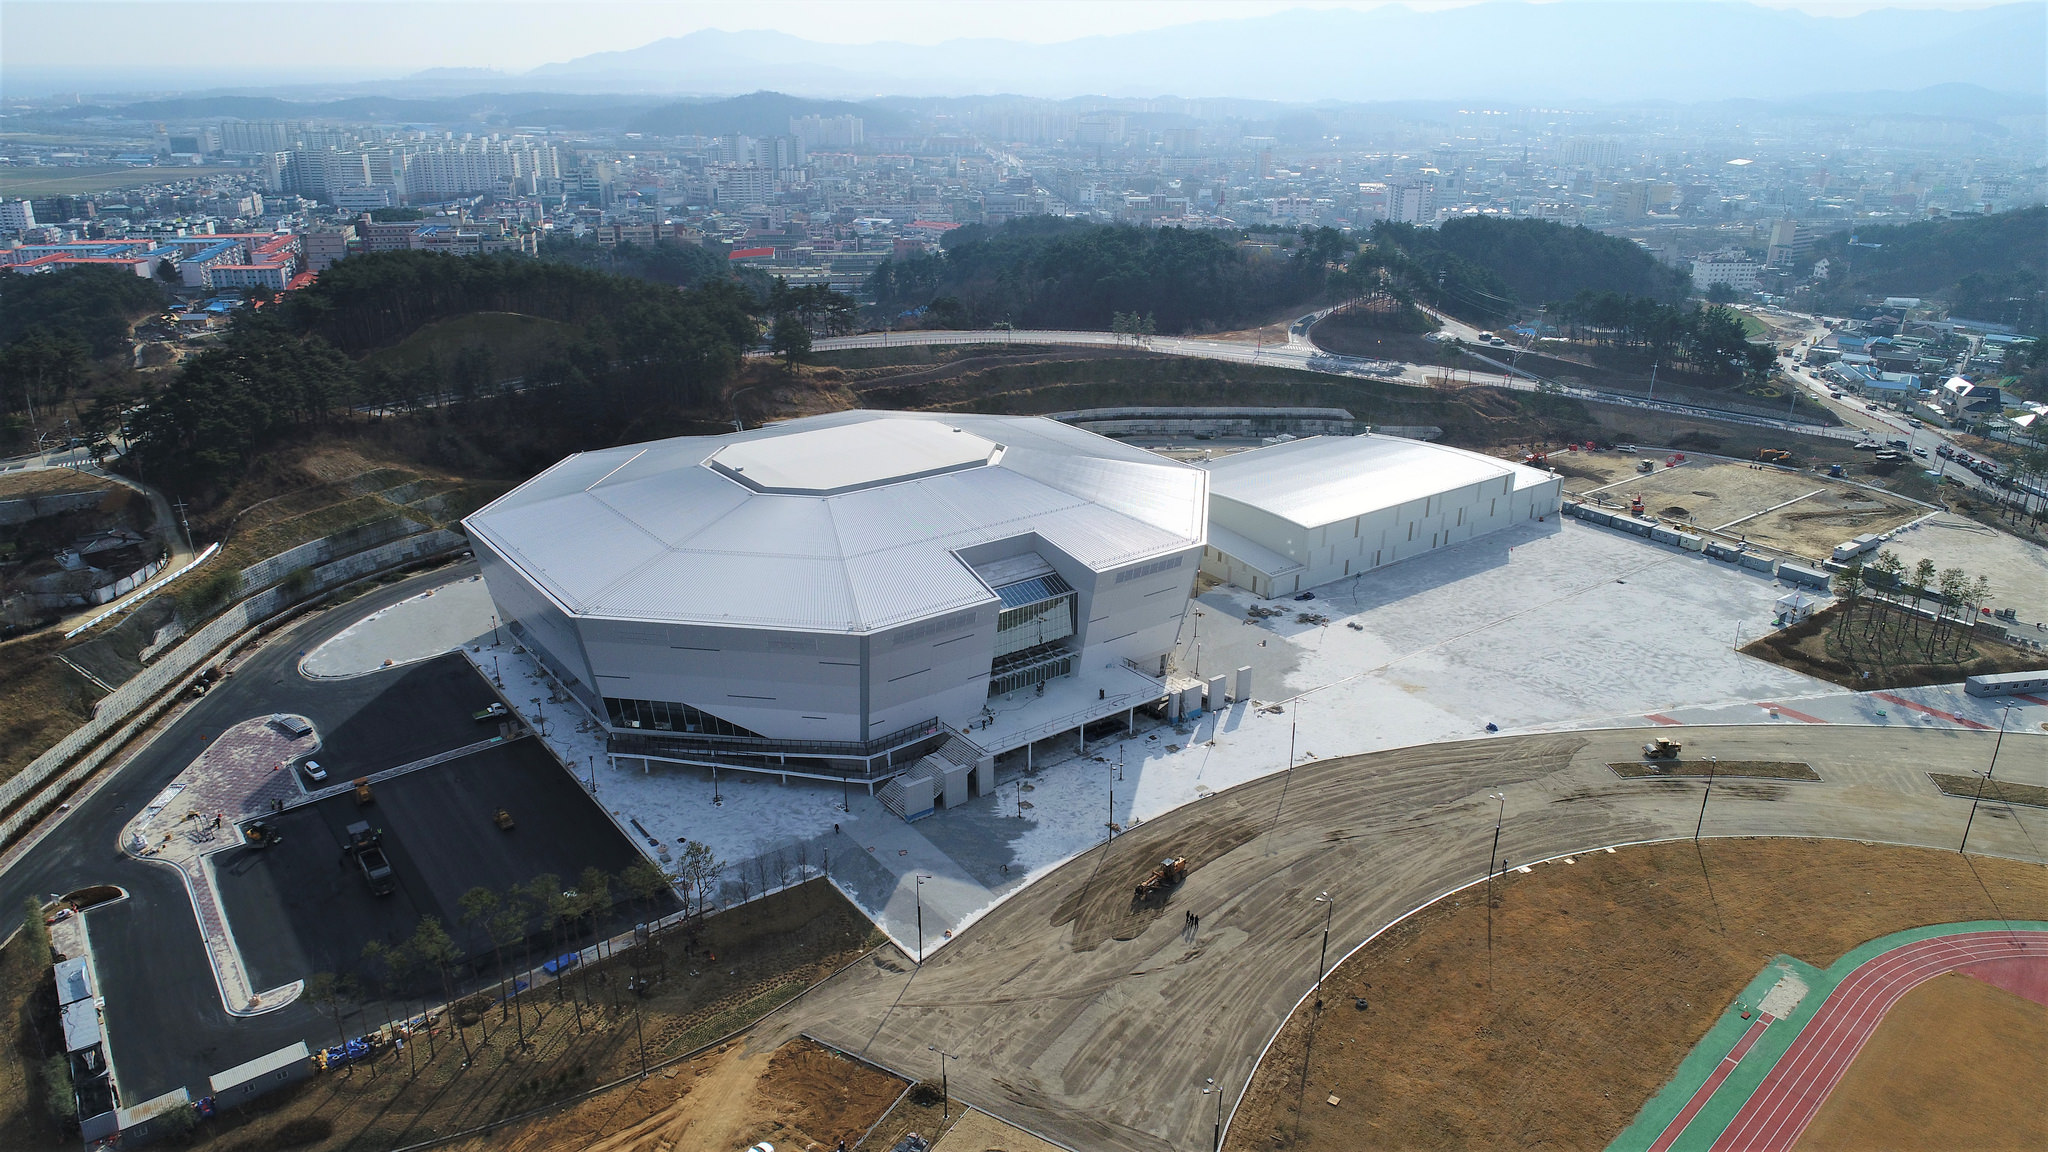 Construction of Pyeongchang Winter Games Stadiums Almost Complete